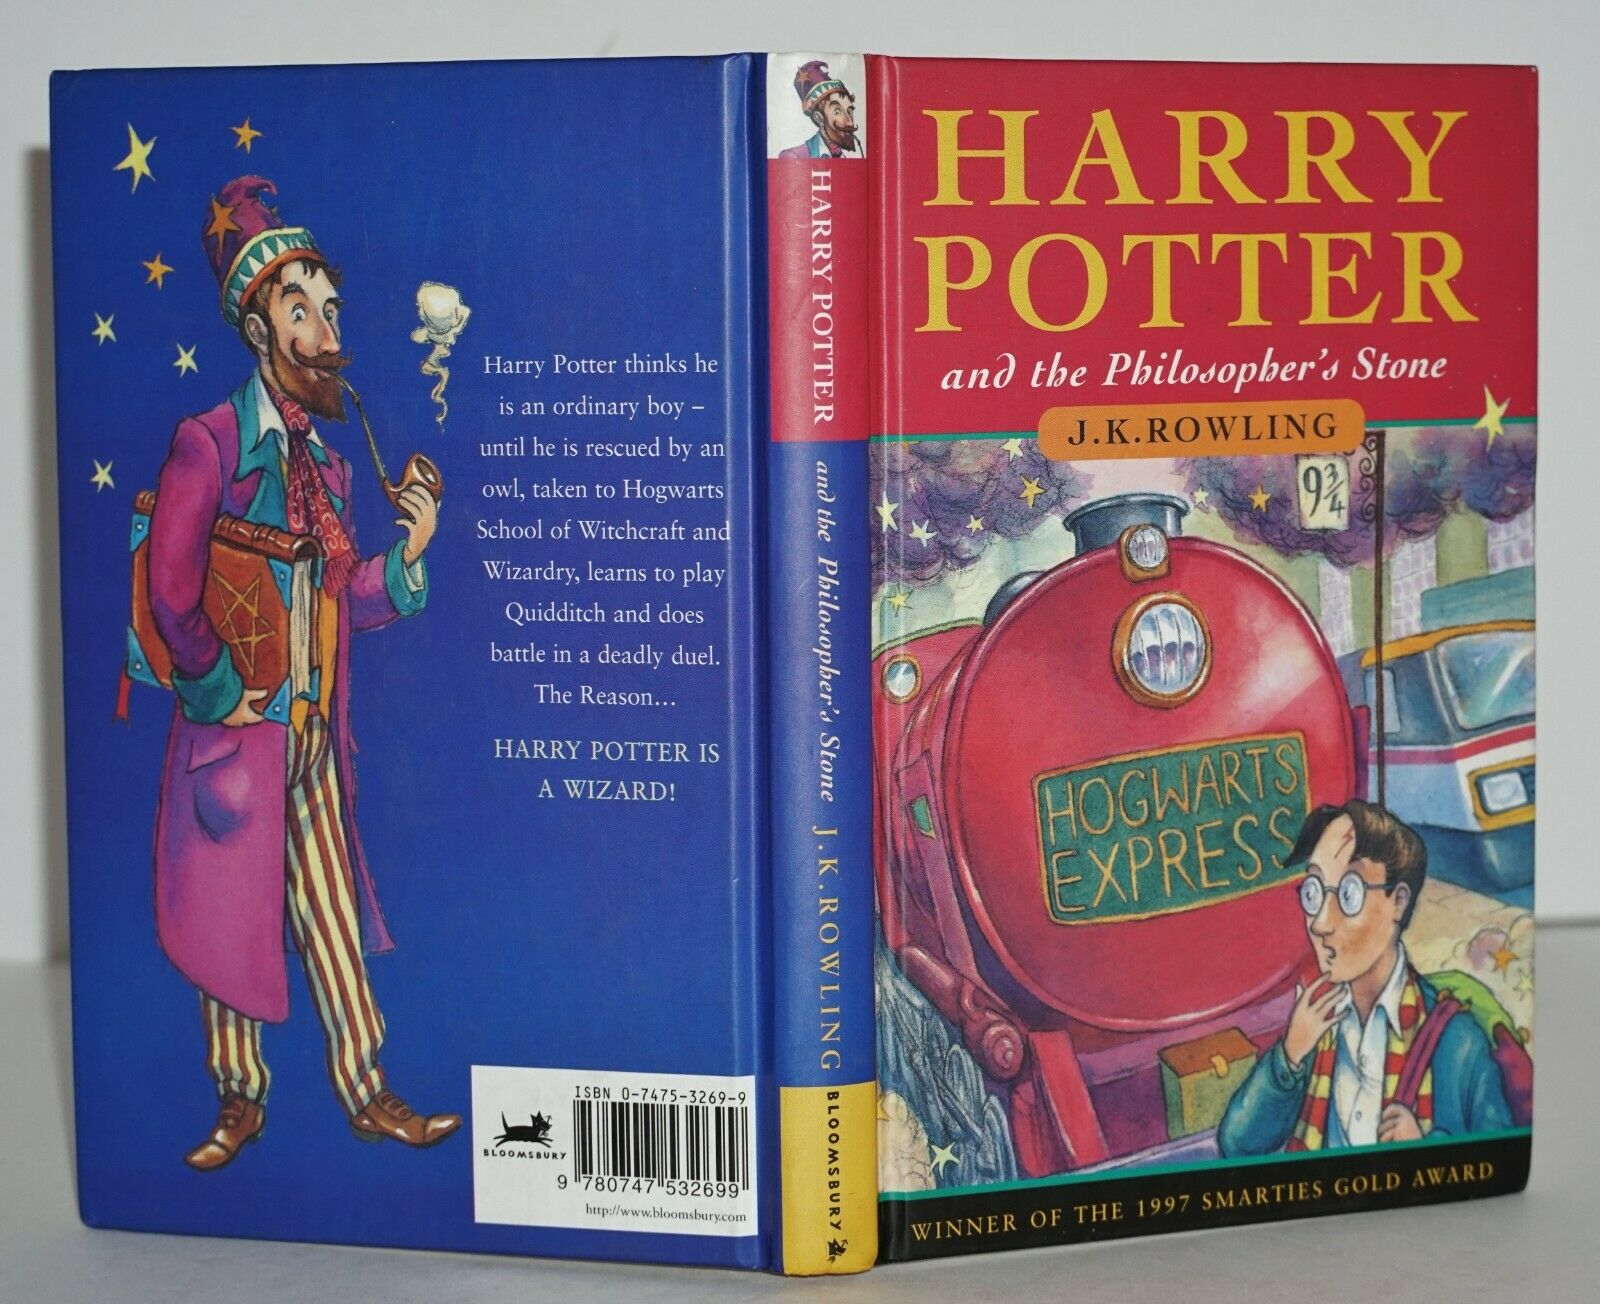 HARRY POTTER AND THE PHILOSOPHER'S STONE (4th BLOOMSBURY PRINTING) von J.K.  ROWLING: Near Fine Hardcover (1997) 1st Edition | Meier And Sons Rare Books